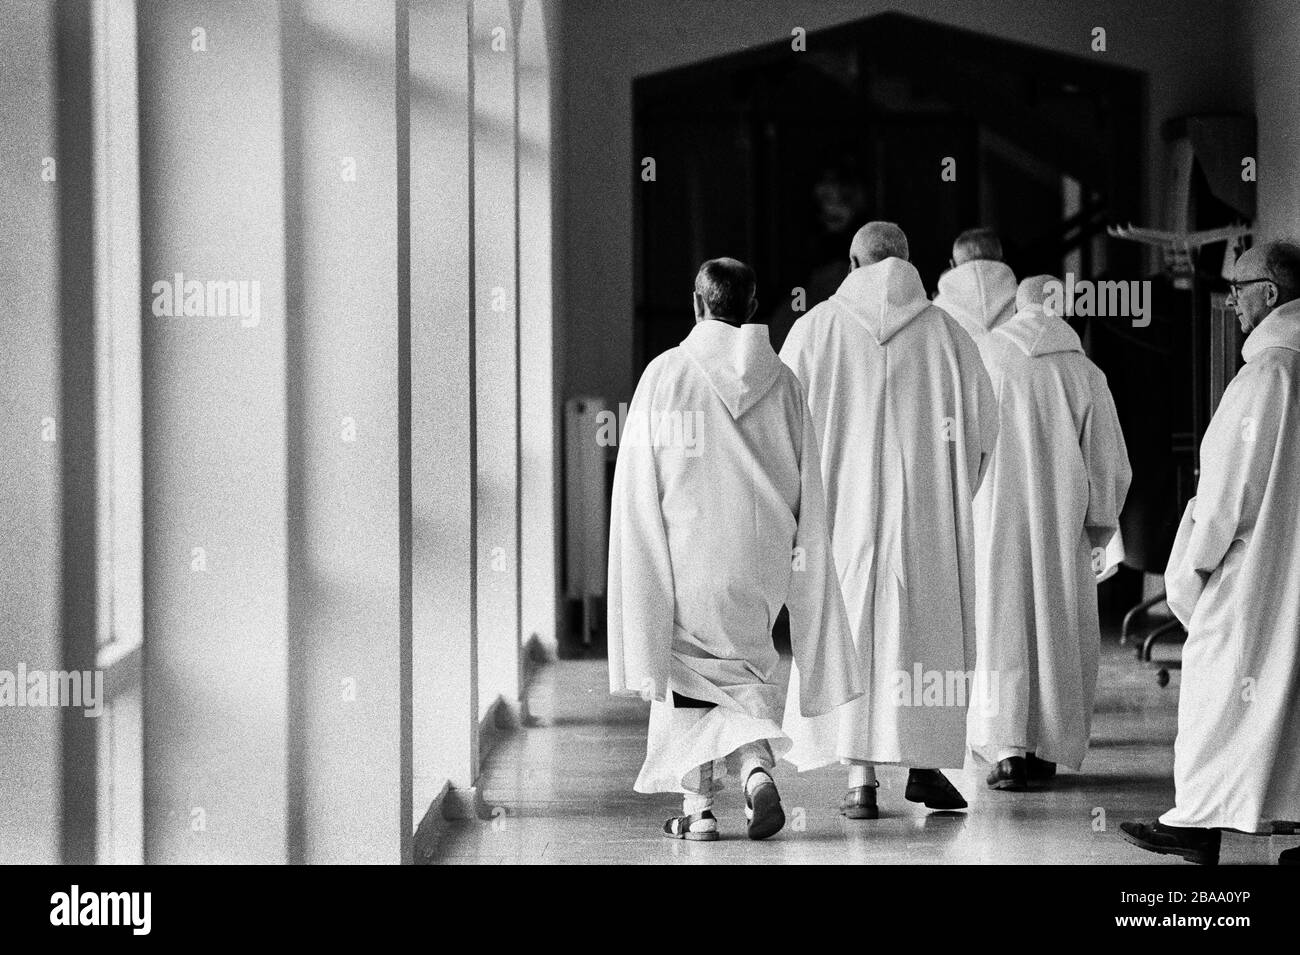 Monks make their way to the prayer chapel at Sancta Maria Abbey at Nunraw, East Lothian, home since 1946 to the Order of Cistercians of the Strict Observance. Around 15 monks were resident at Nunraw in 1996, undertaking a mixture of daily tasks and strict religious observance. The present purpose-built building dates from 1969 when the monks moved from the nearby Nunraw house. Stock Photo